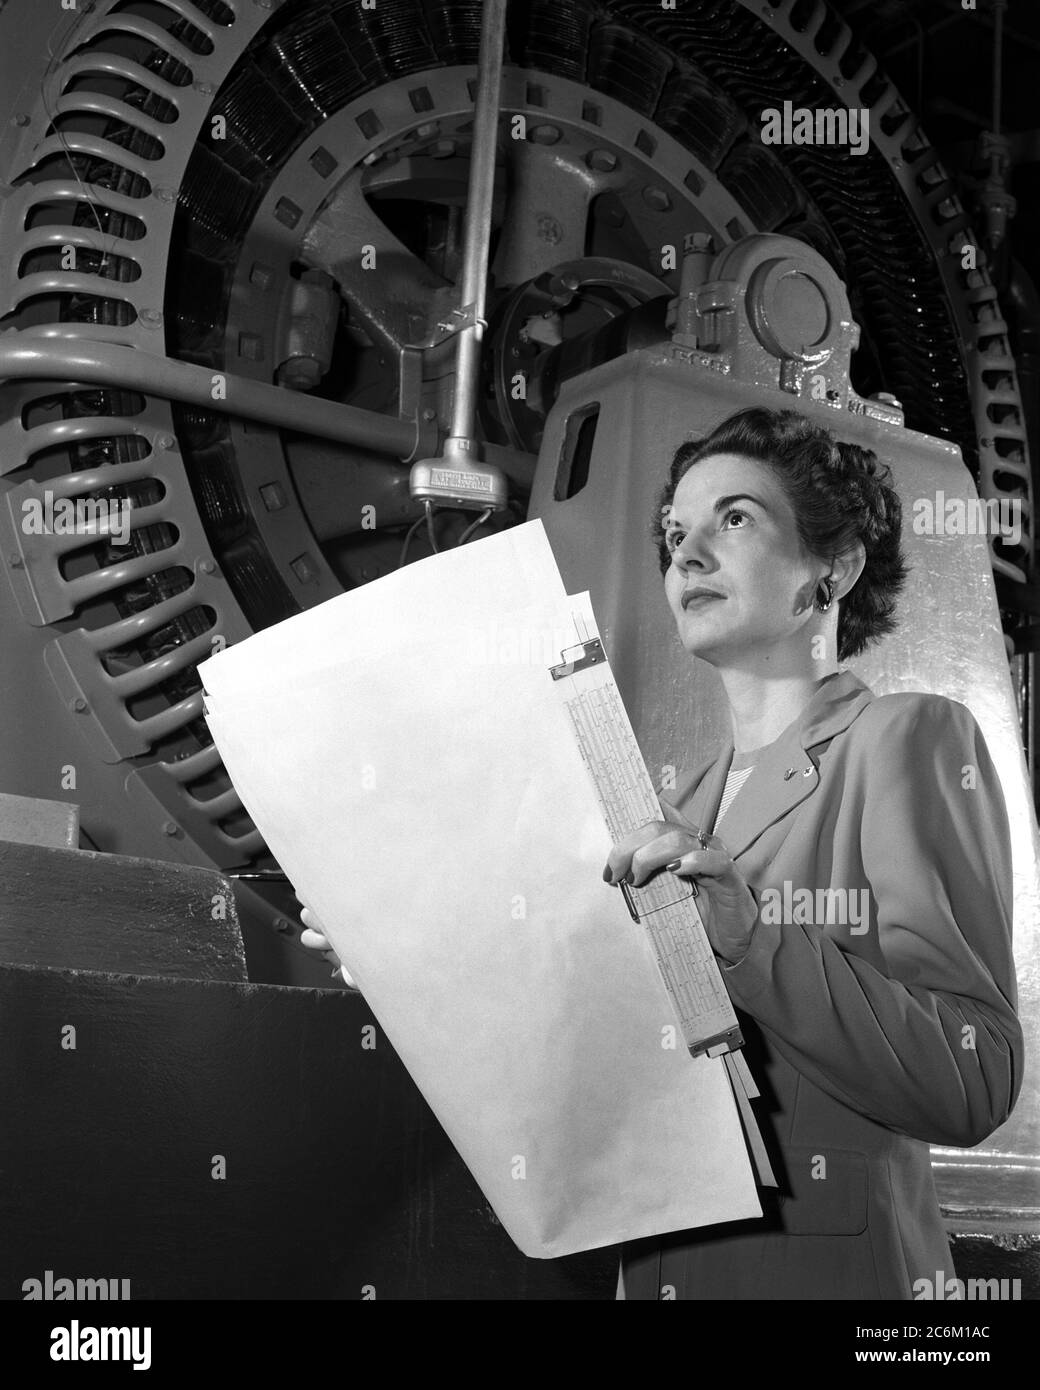 1952 , USA : The american Electrical Engineer woman KITTY Wingfield O'BRIEN JOYNER ( 1916 - 1993 ) of NASA ,  at work , expert in Electronics , at LANGLEY RESEARCH CENTER .  In this photo analyzing the operation of a wind tunnel turbine at NACA Langley in 1952 . Remembered like the first woman engineer at the Memorial Langley Aeronautical Laboratory . - NASA - N.A.S.A. - The National Aeronautics and Space Administration - foto storiche - foto storica  - scienziato - scientist  - INGEGNERE  DONNA  - INGEGNERIA ELETTRONICA - DONNE DONNA - AL LAVORO - AERONAUTICA --- Archivio GBB Stock Photo